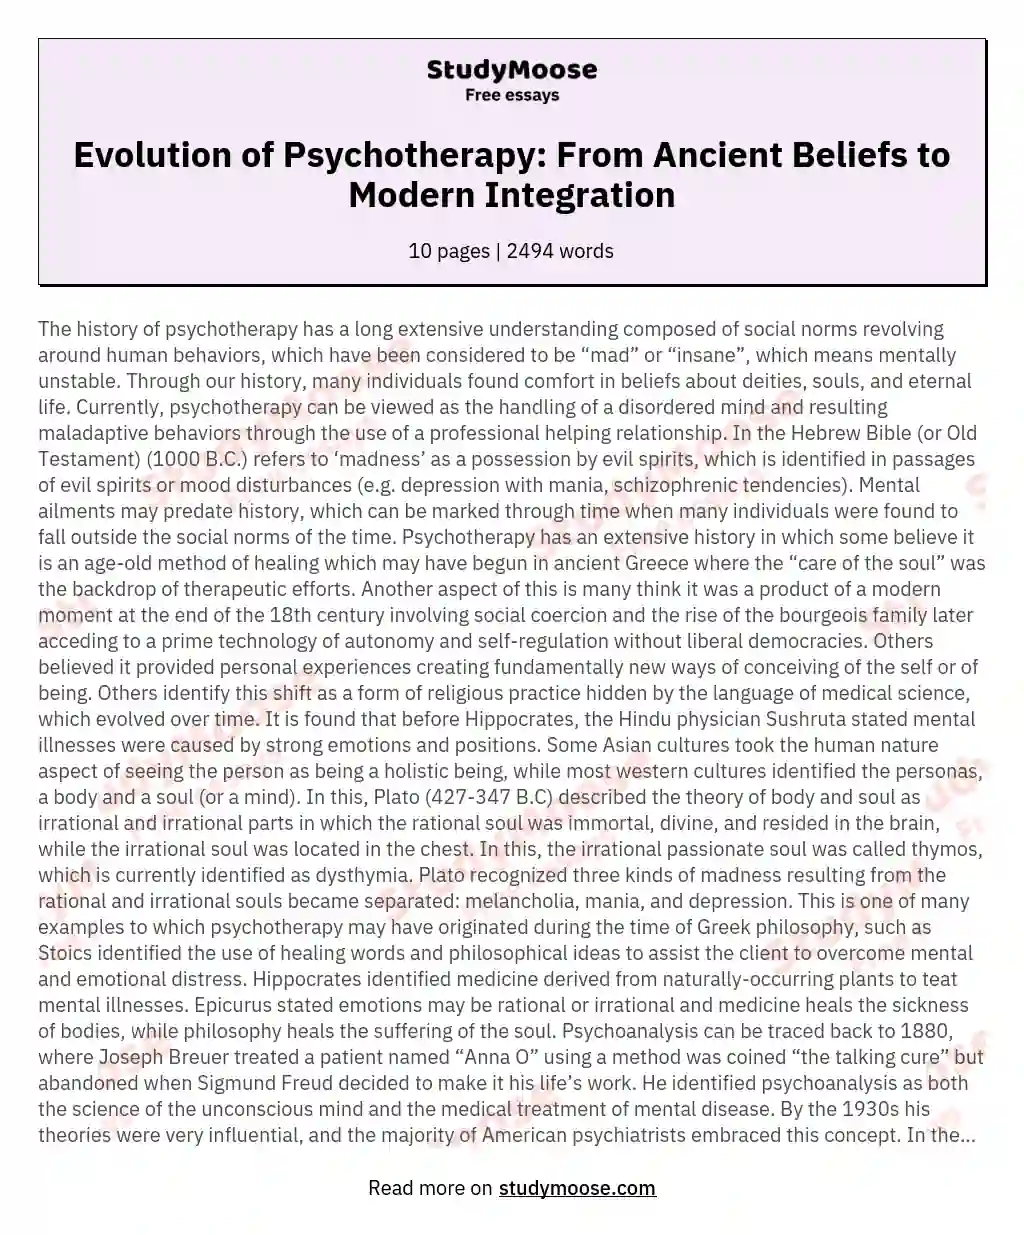 Evolution of Psychotherapy: From Ancient Beliefs to Modern Integration essay